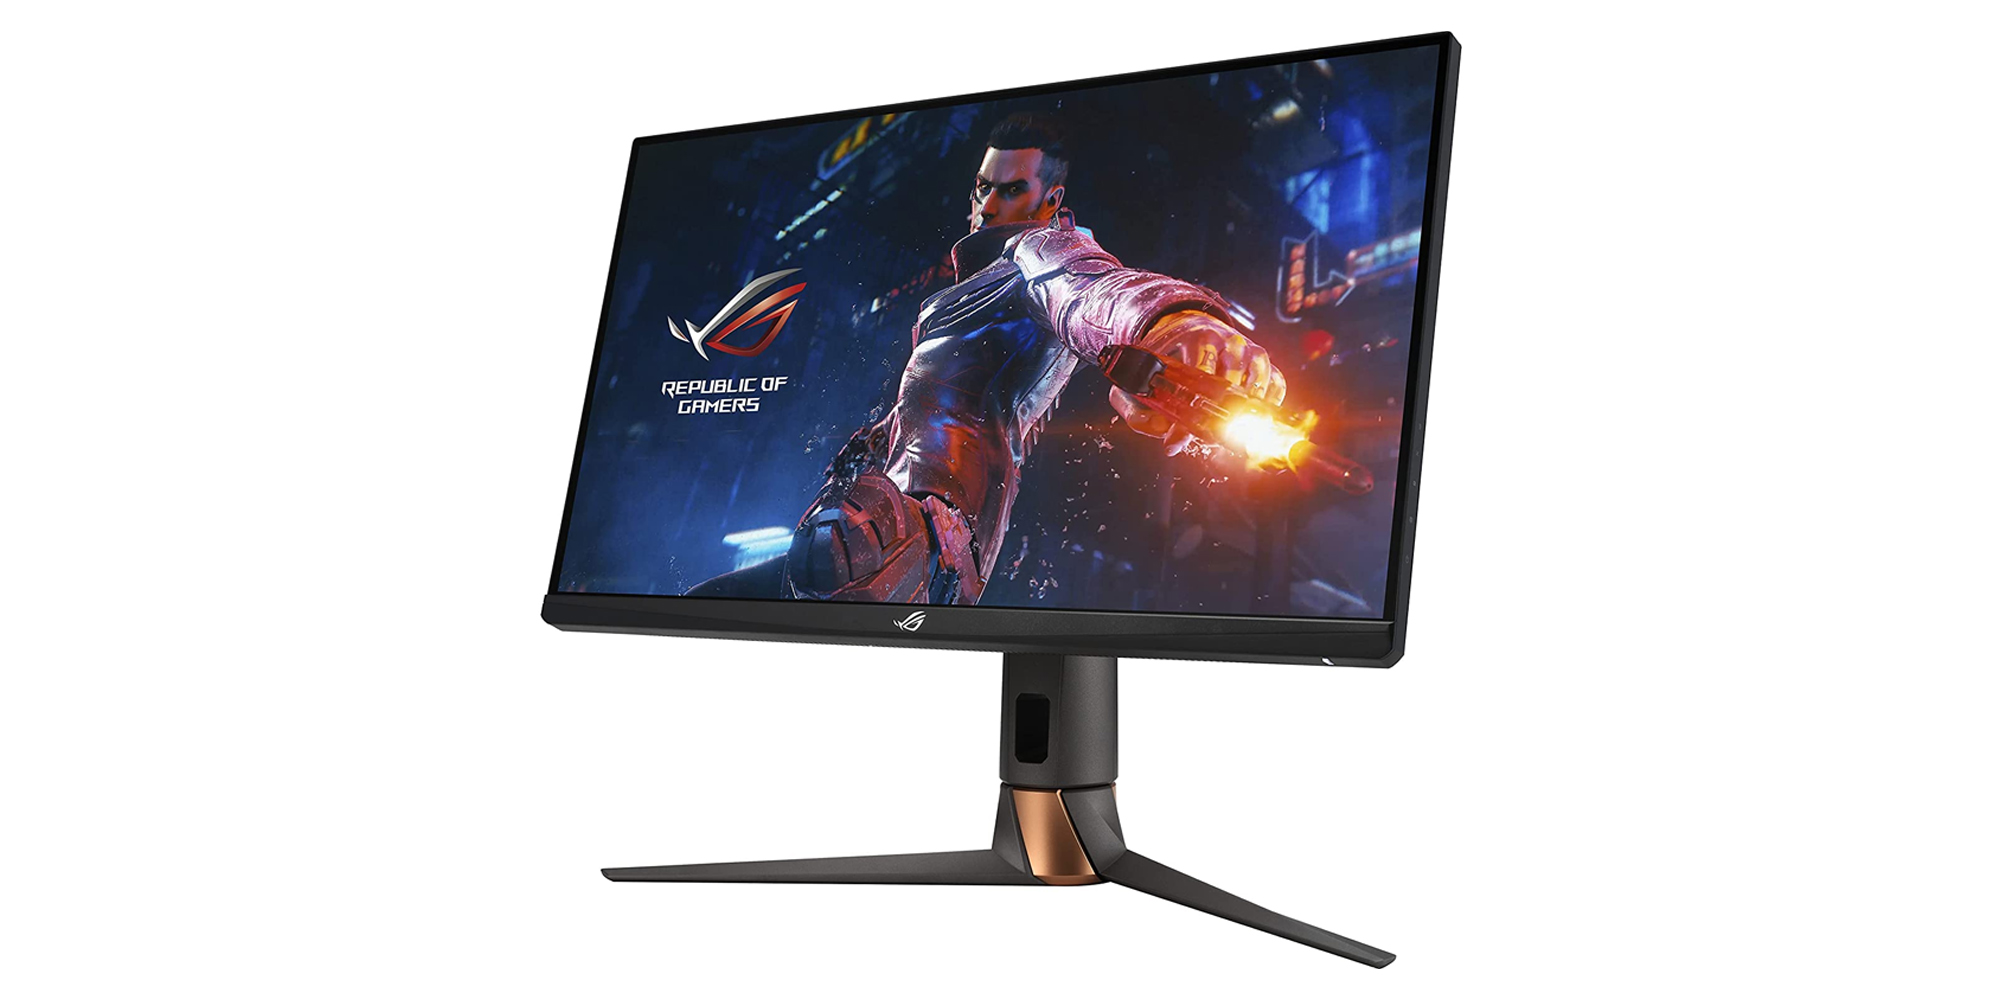 Add ASUS' 27-inch 1440p 240Hz monitor to your gaming setup at its